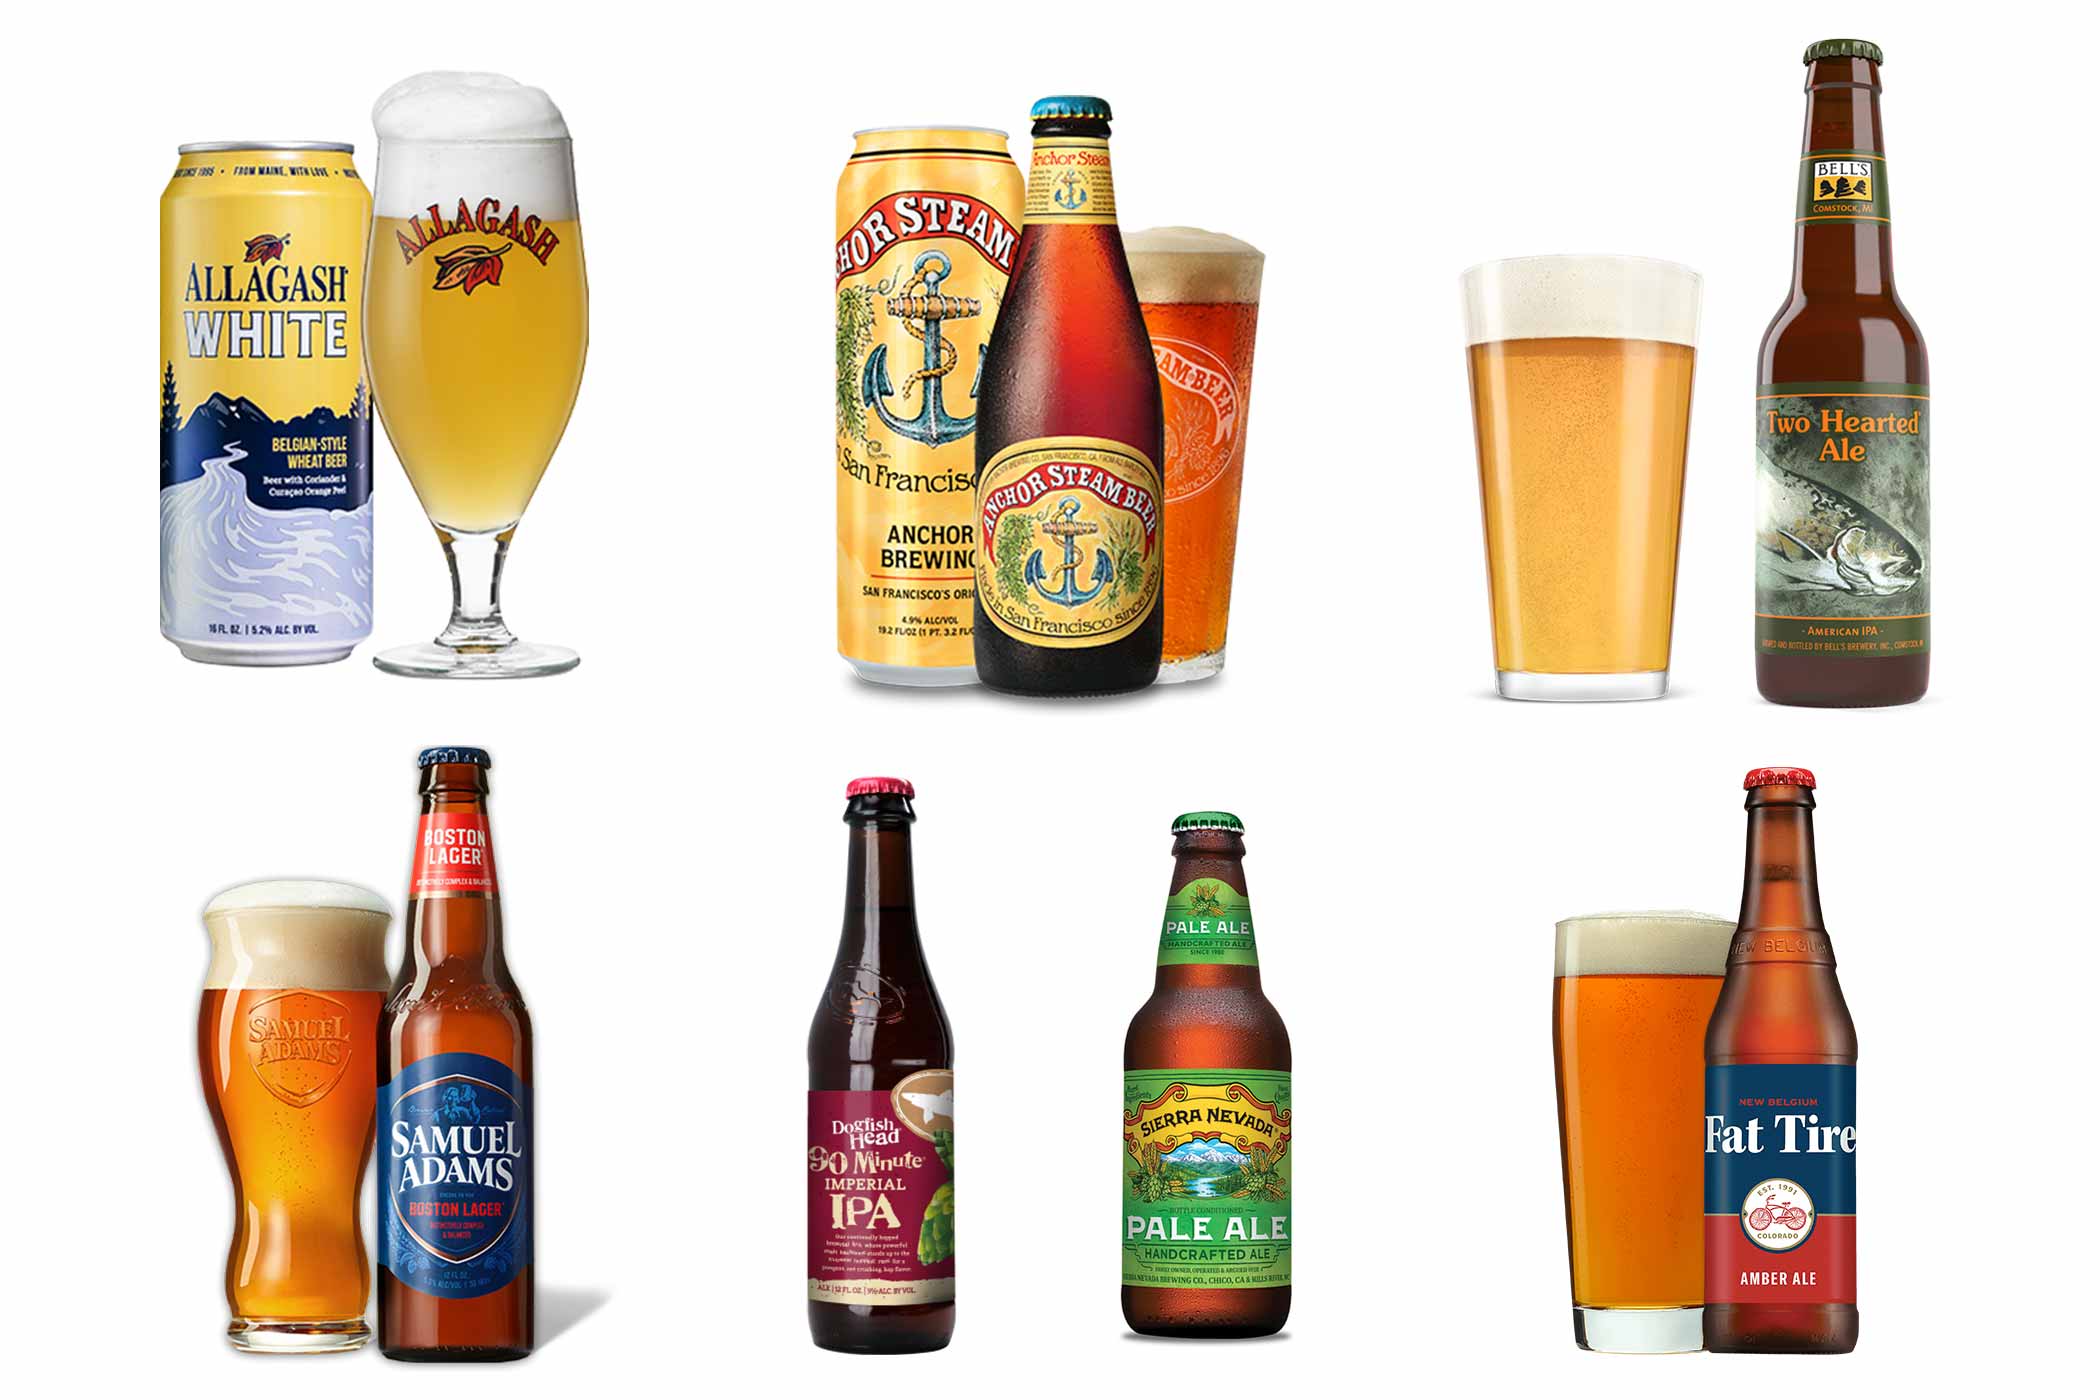 Best Lager Beer: 5 Best Lager Beers You Can Find Almost Anywhere